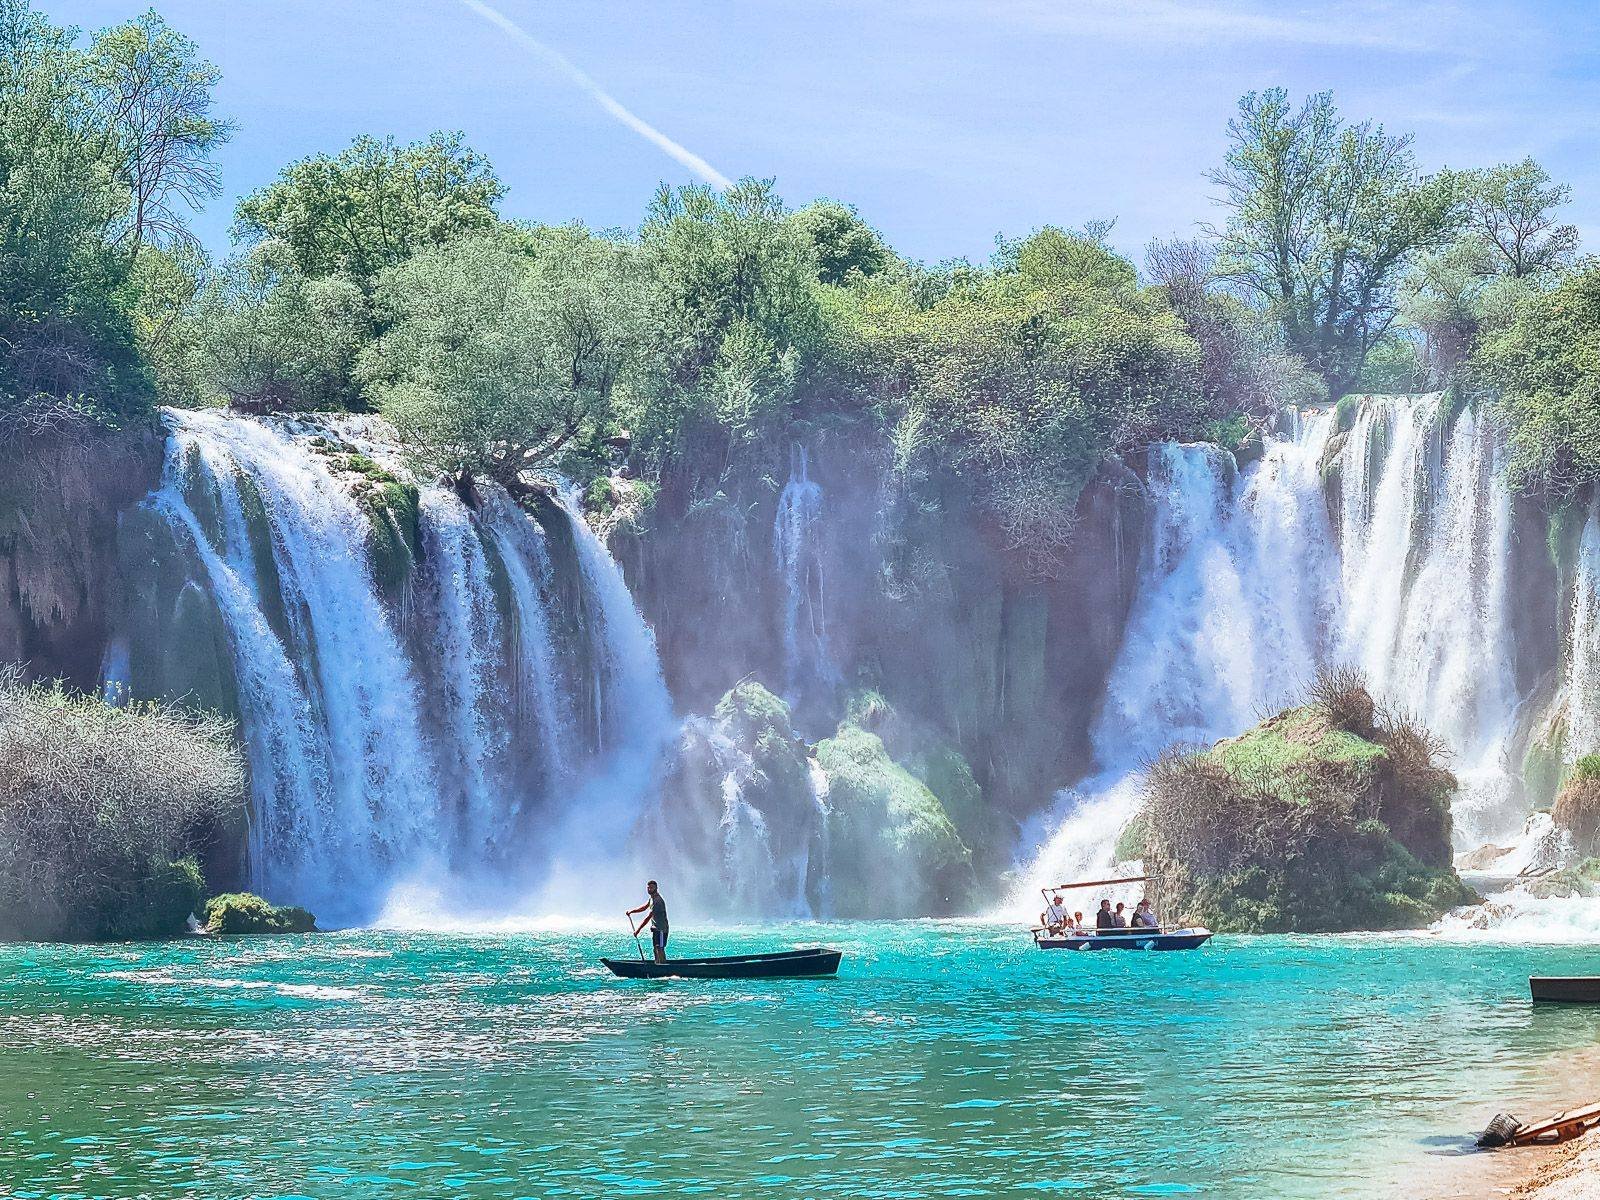 A seres of waterfalls falling into turquoise water with a man paddling a boat in the middle